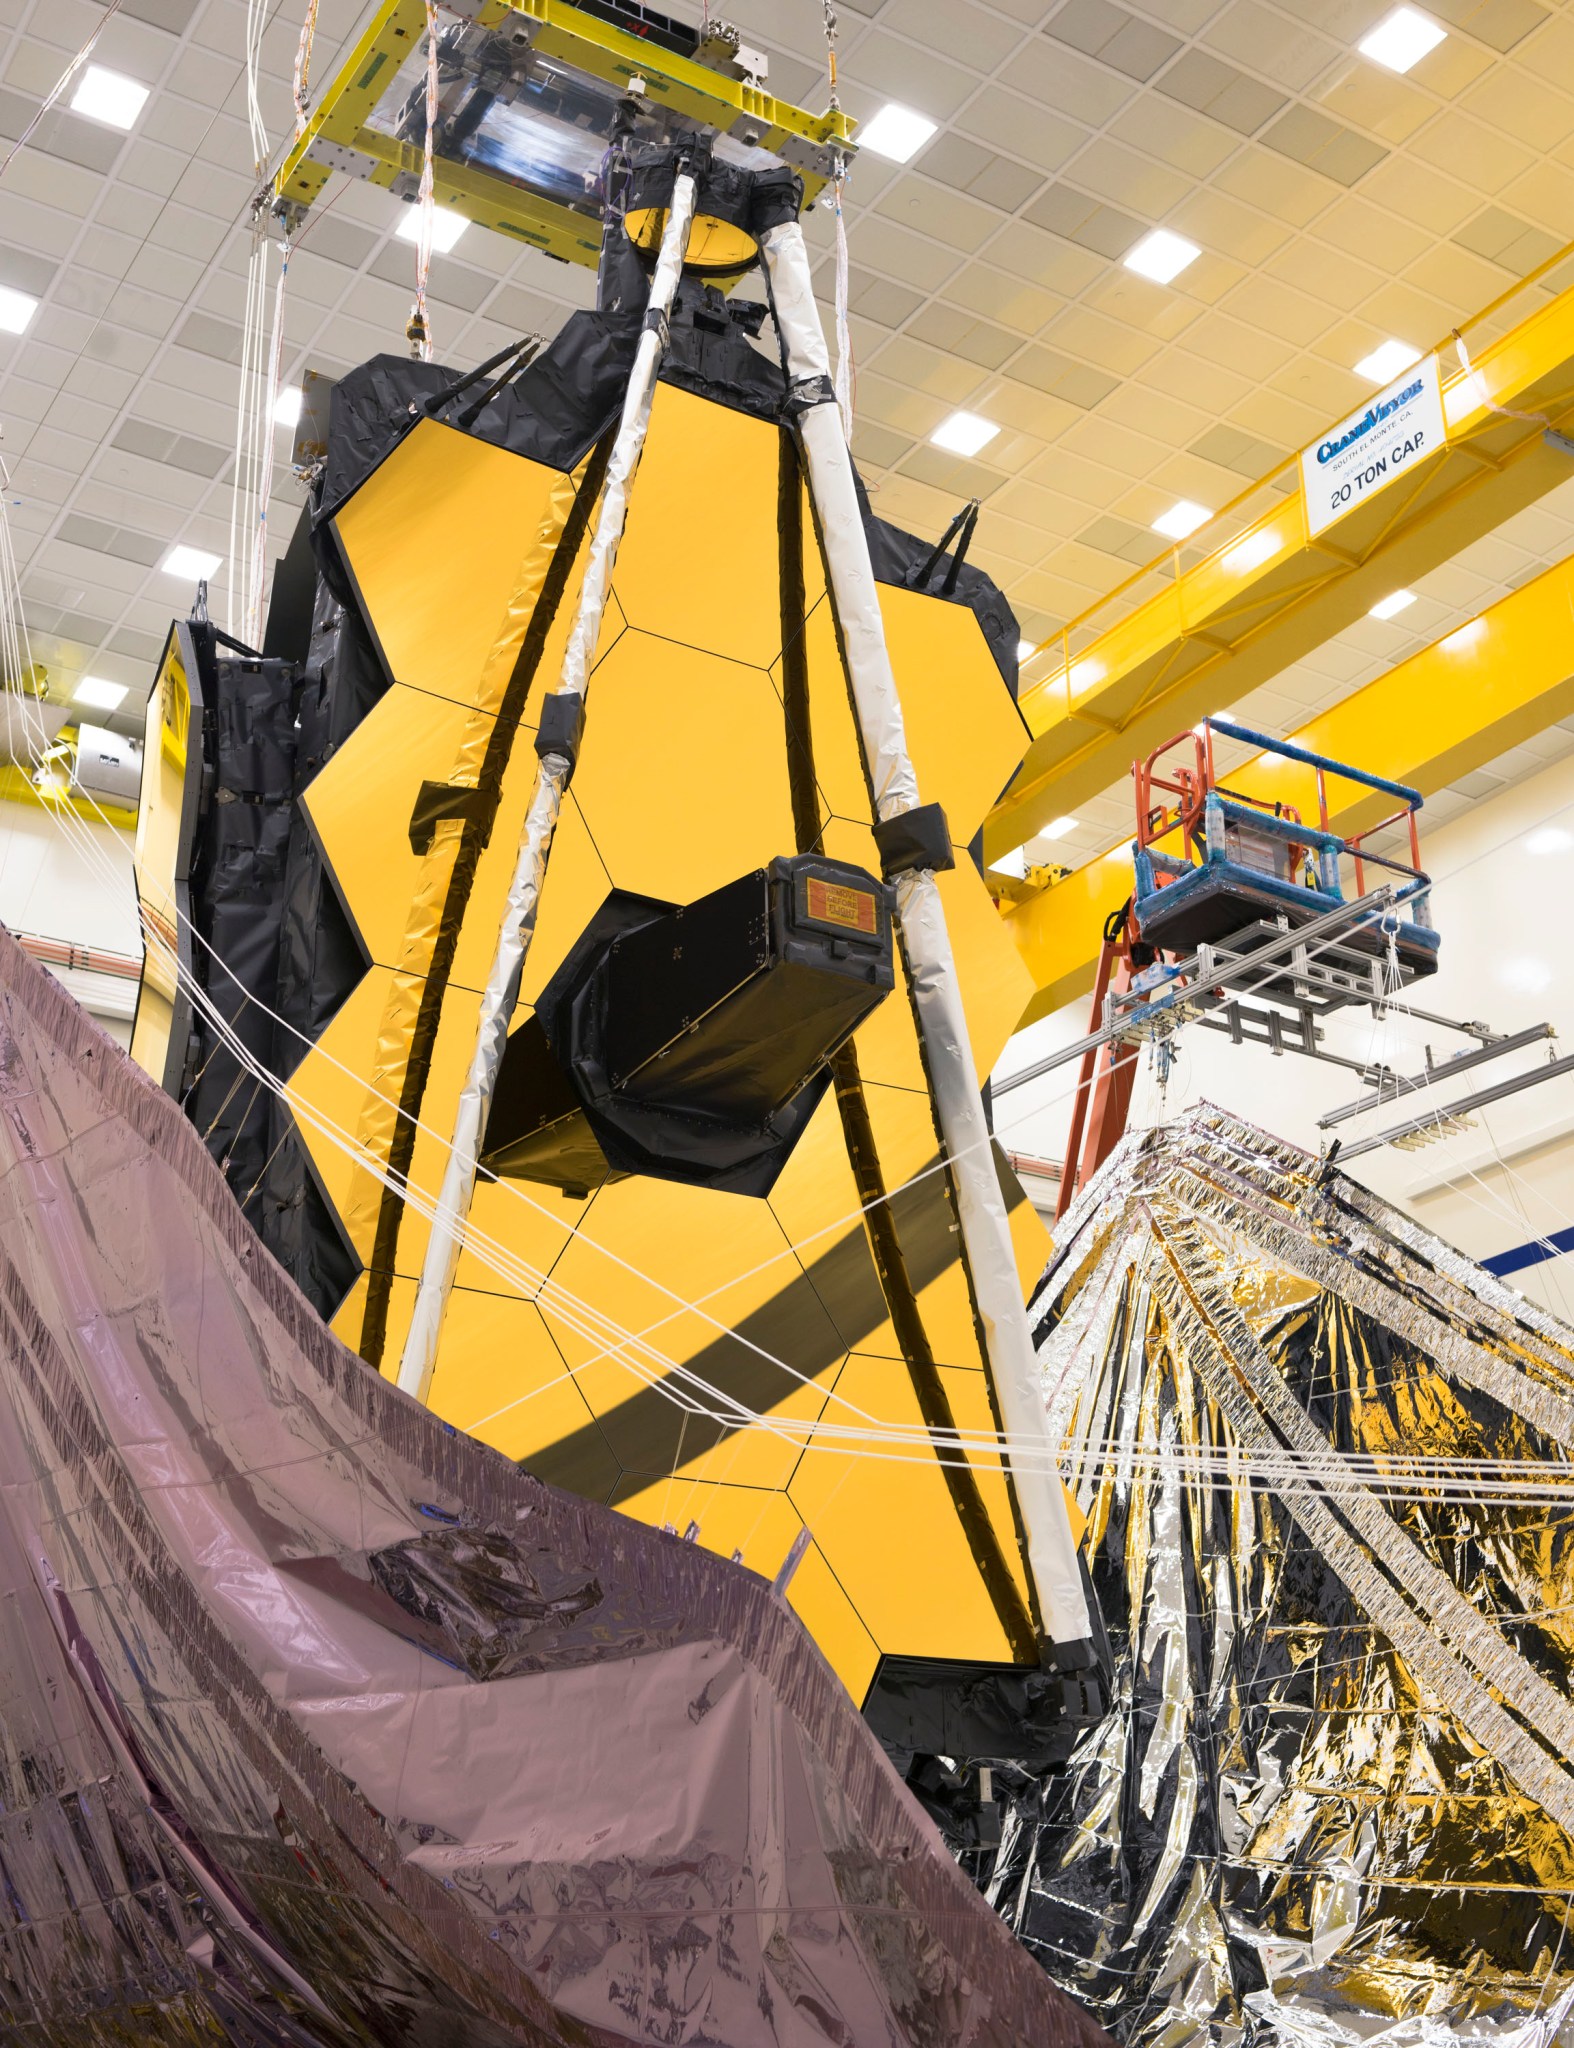 The Webb Telescope's sunshield is lifted vertically on both sides in preparation for the folding process.